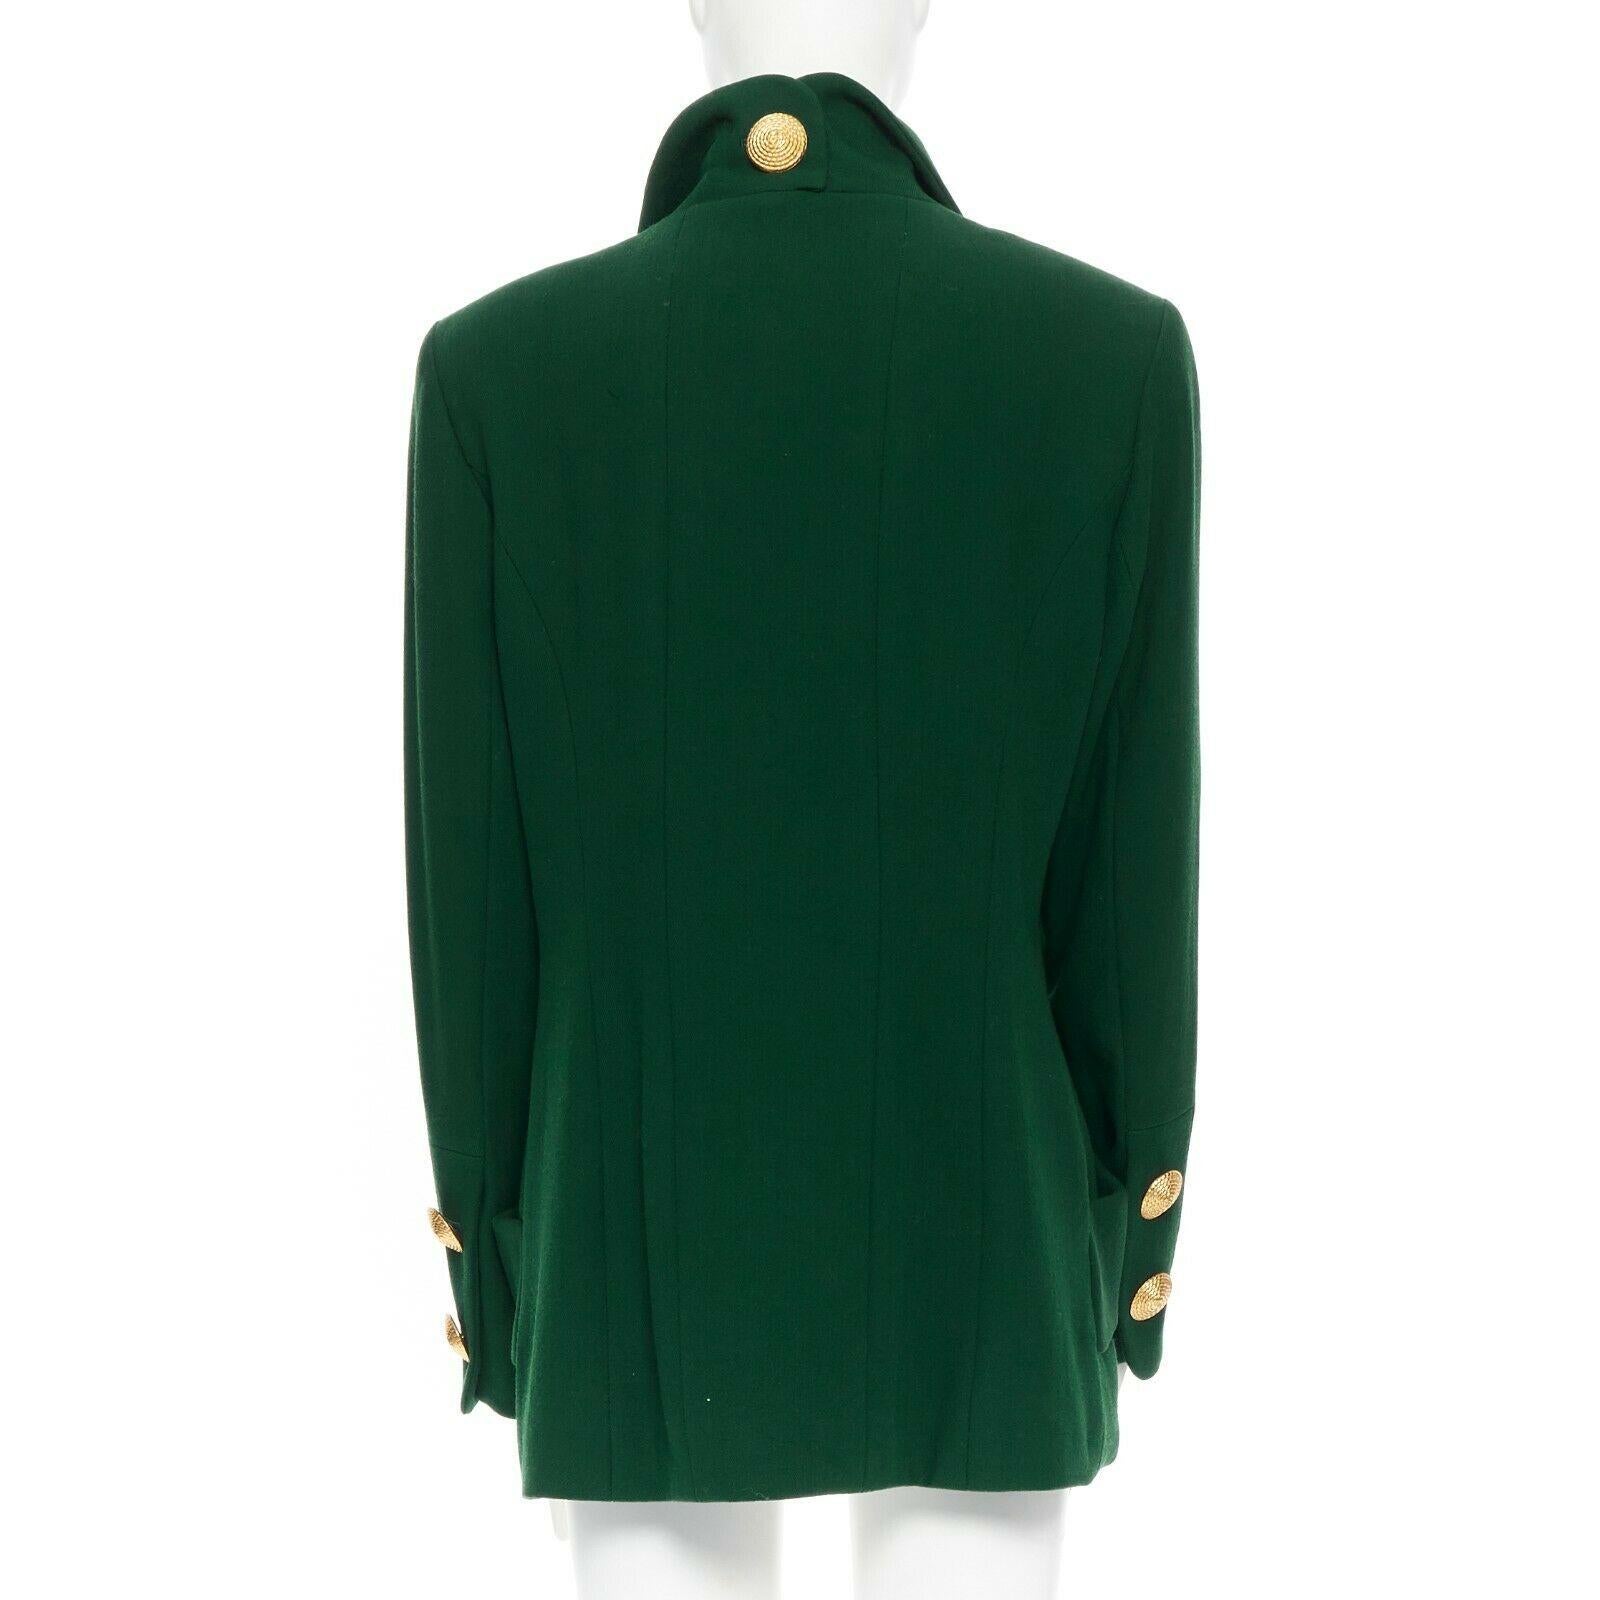 Black CHANEL 92A vintage emerald green 4 pockets gold buttons tailored jacket